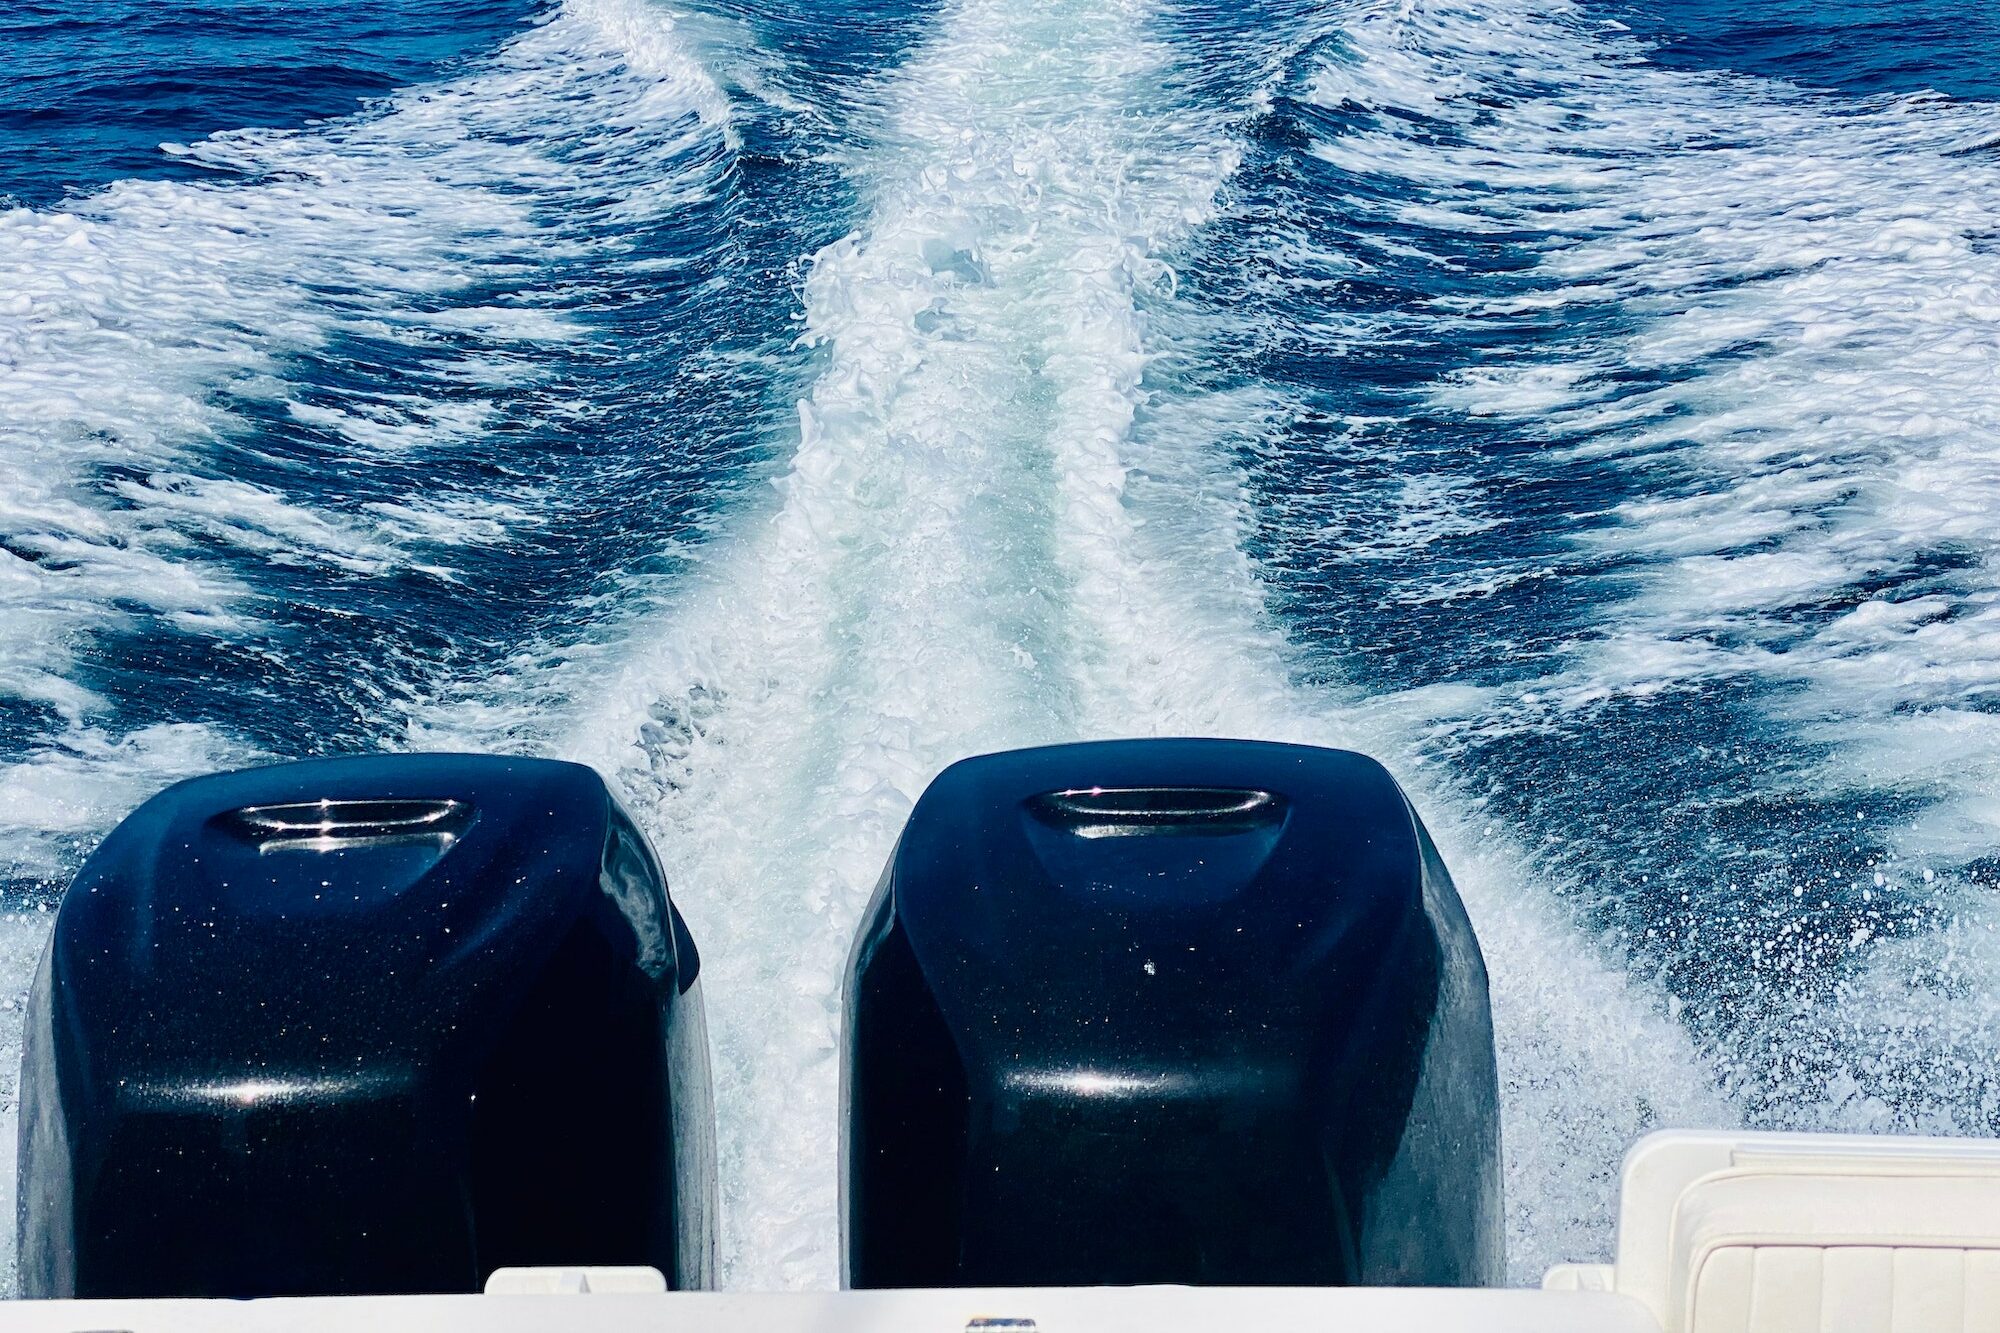 The wake of a speed boat yacht in the open Pacific